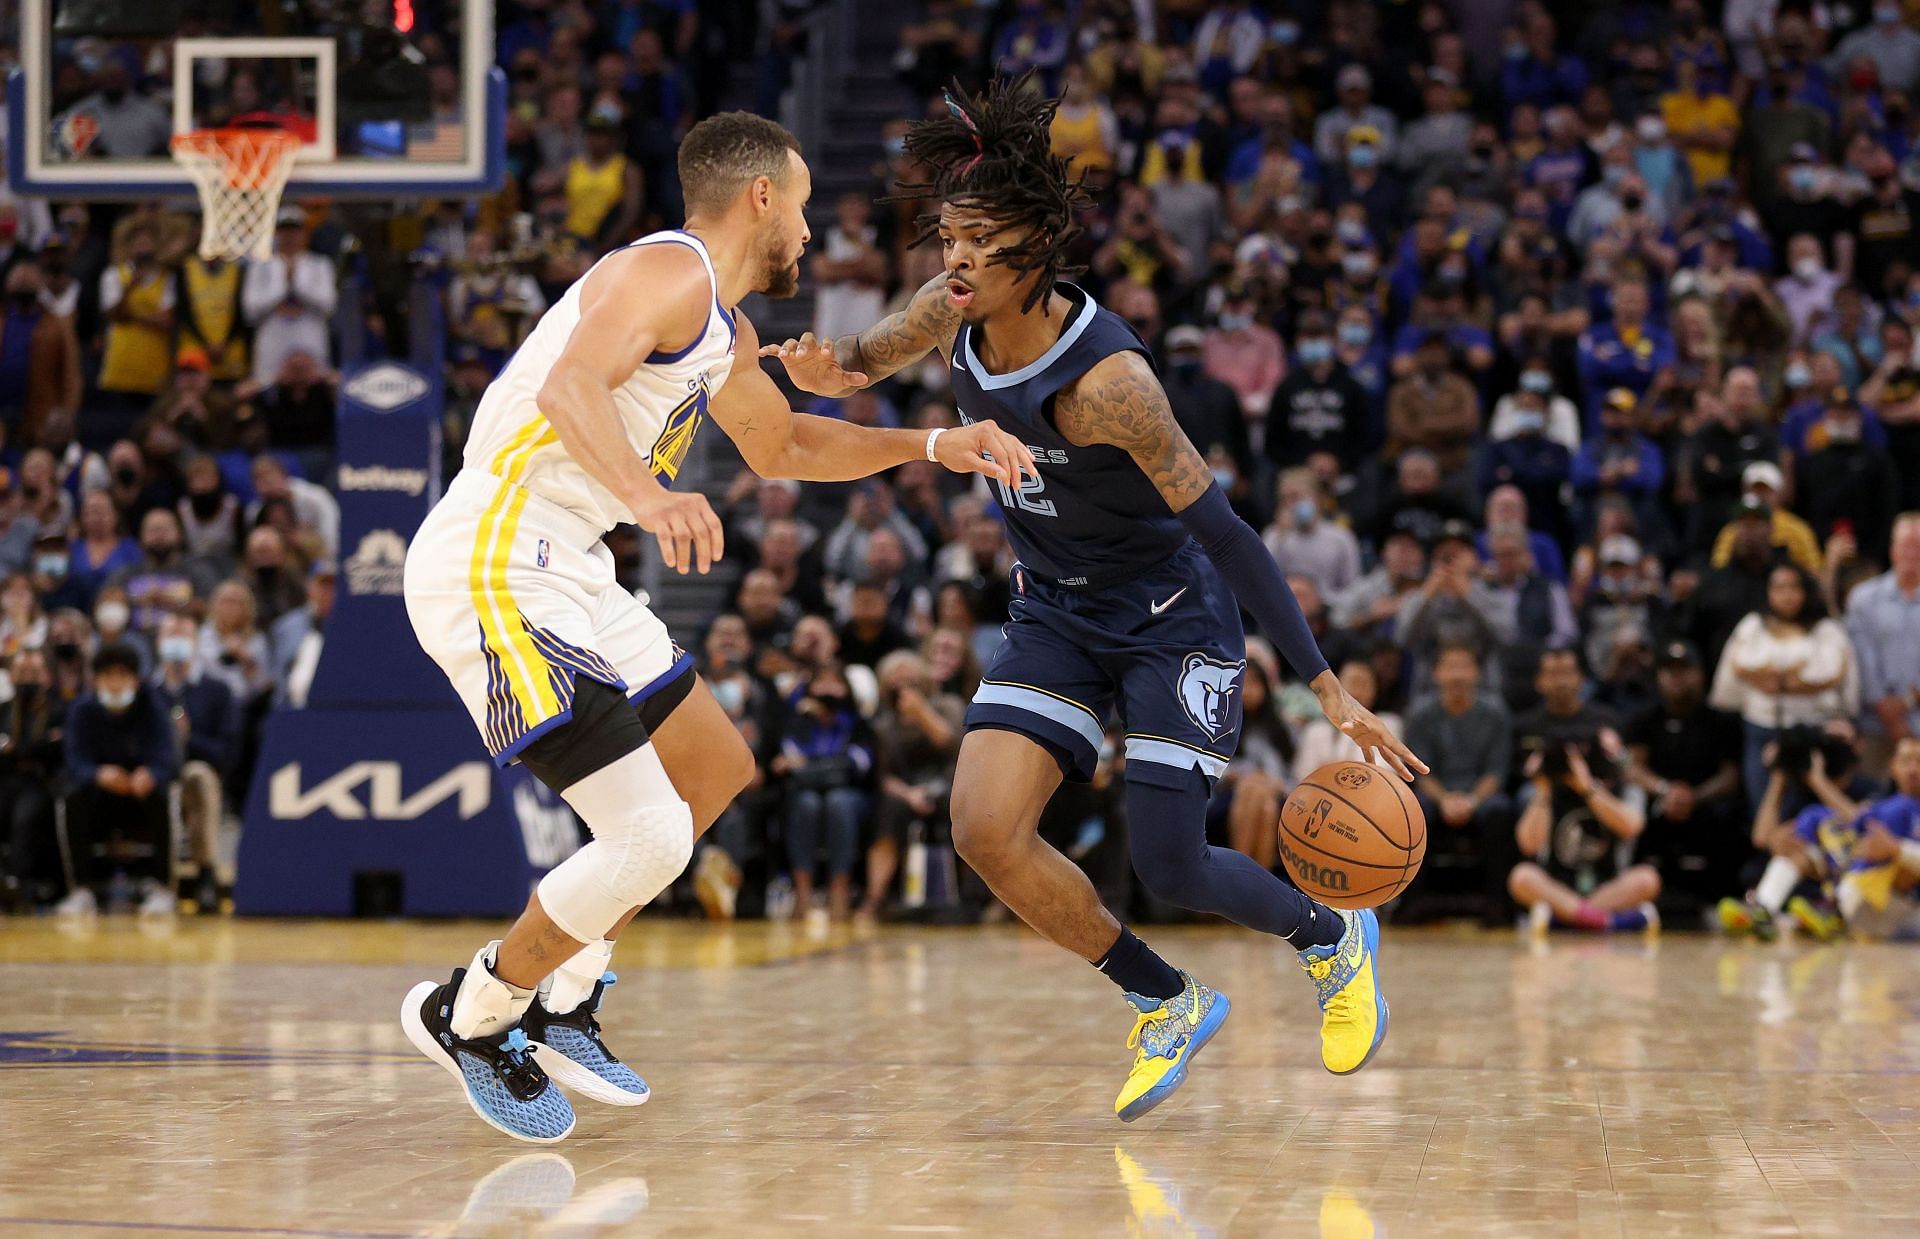 Steph Curry's shadow is back as Ja Morant and Grizzlies sit latest